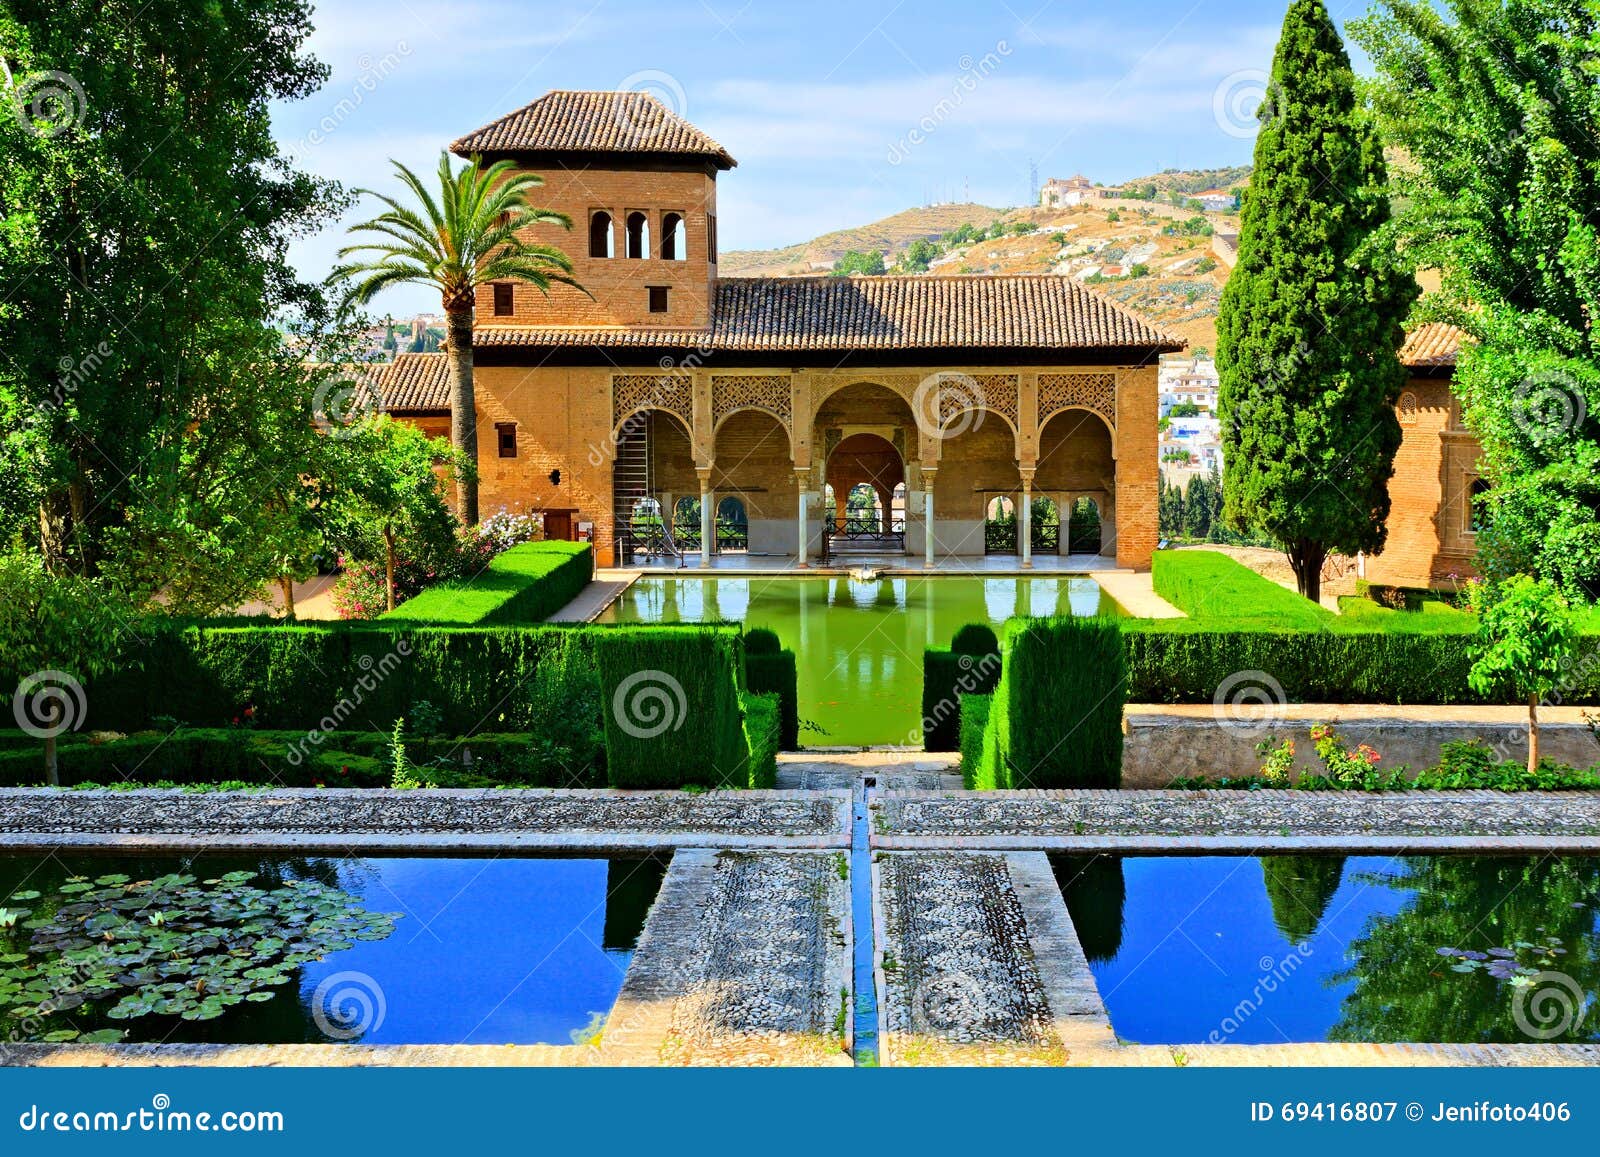 gardens of the partal palace at the alhambra, granada, spain